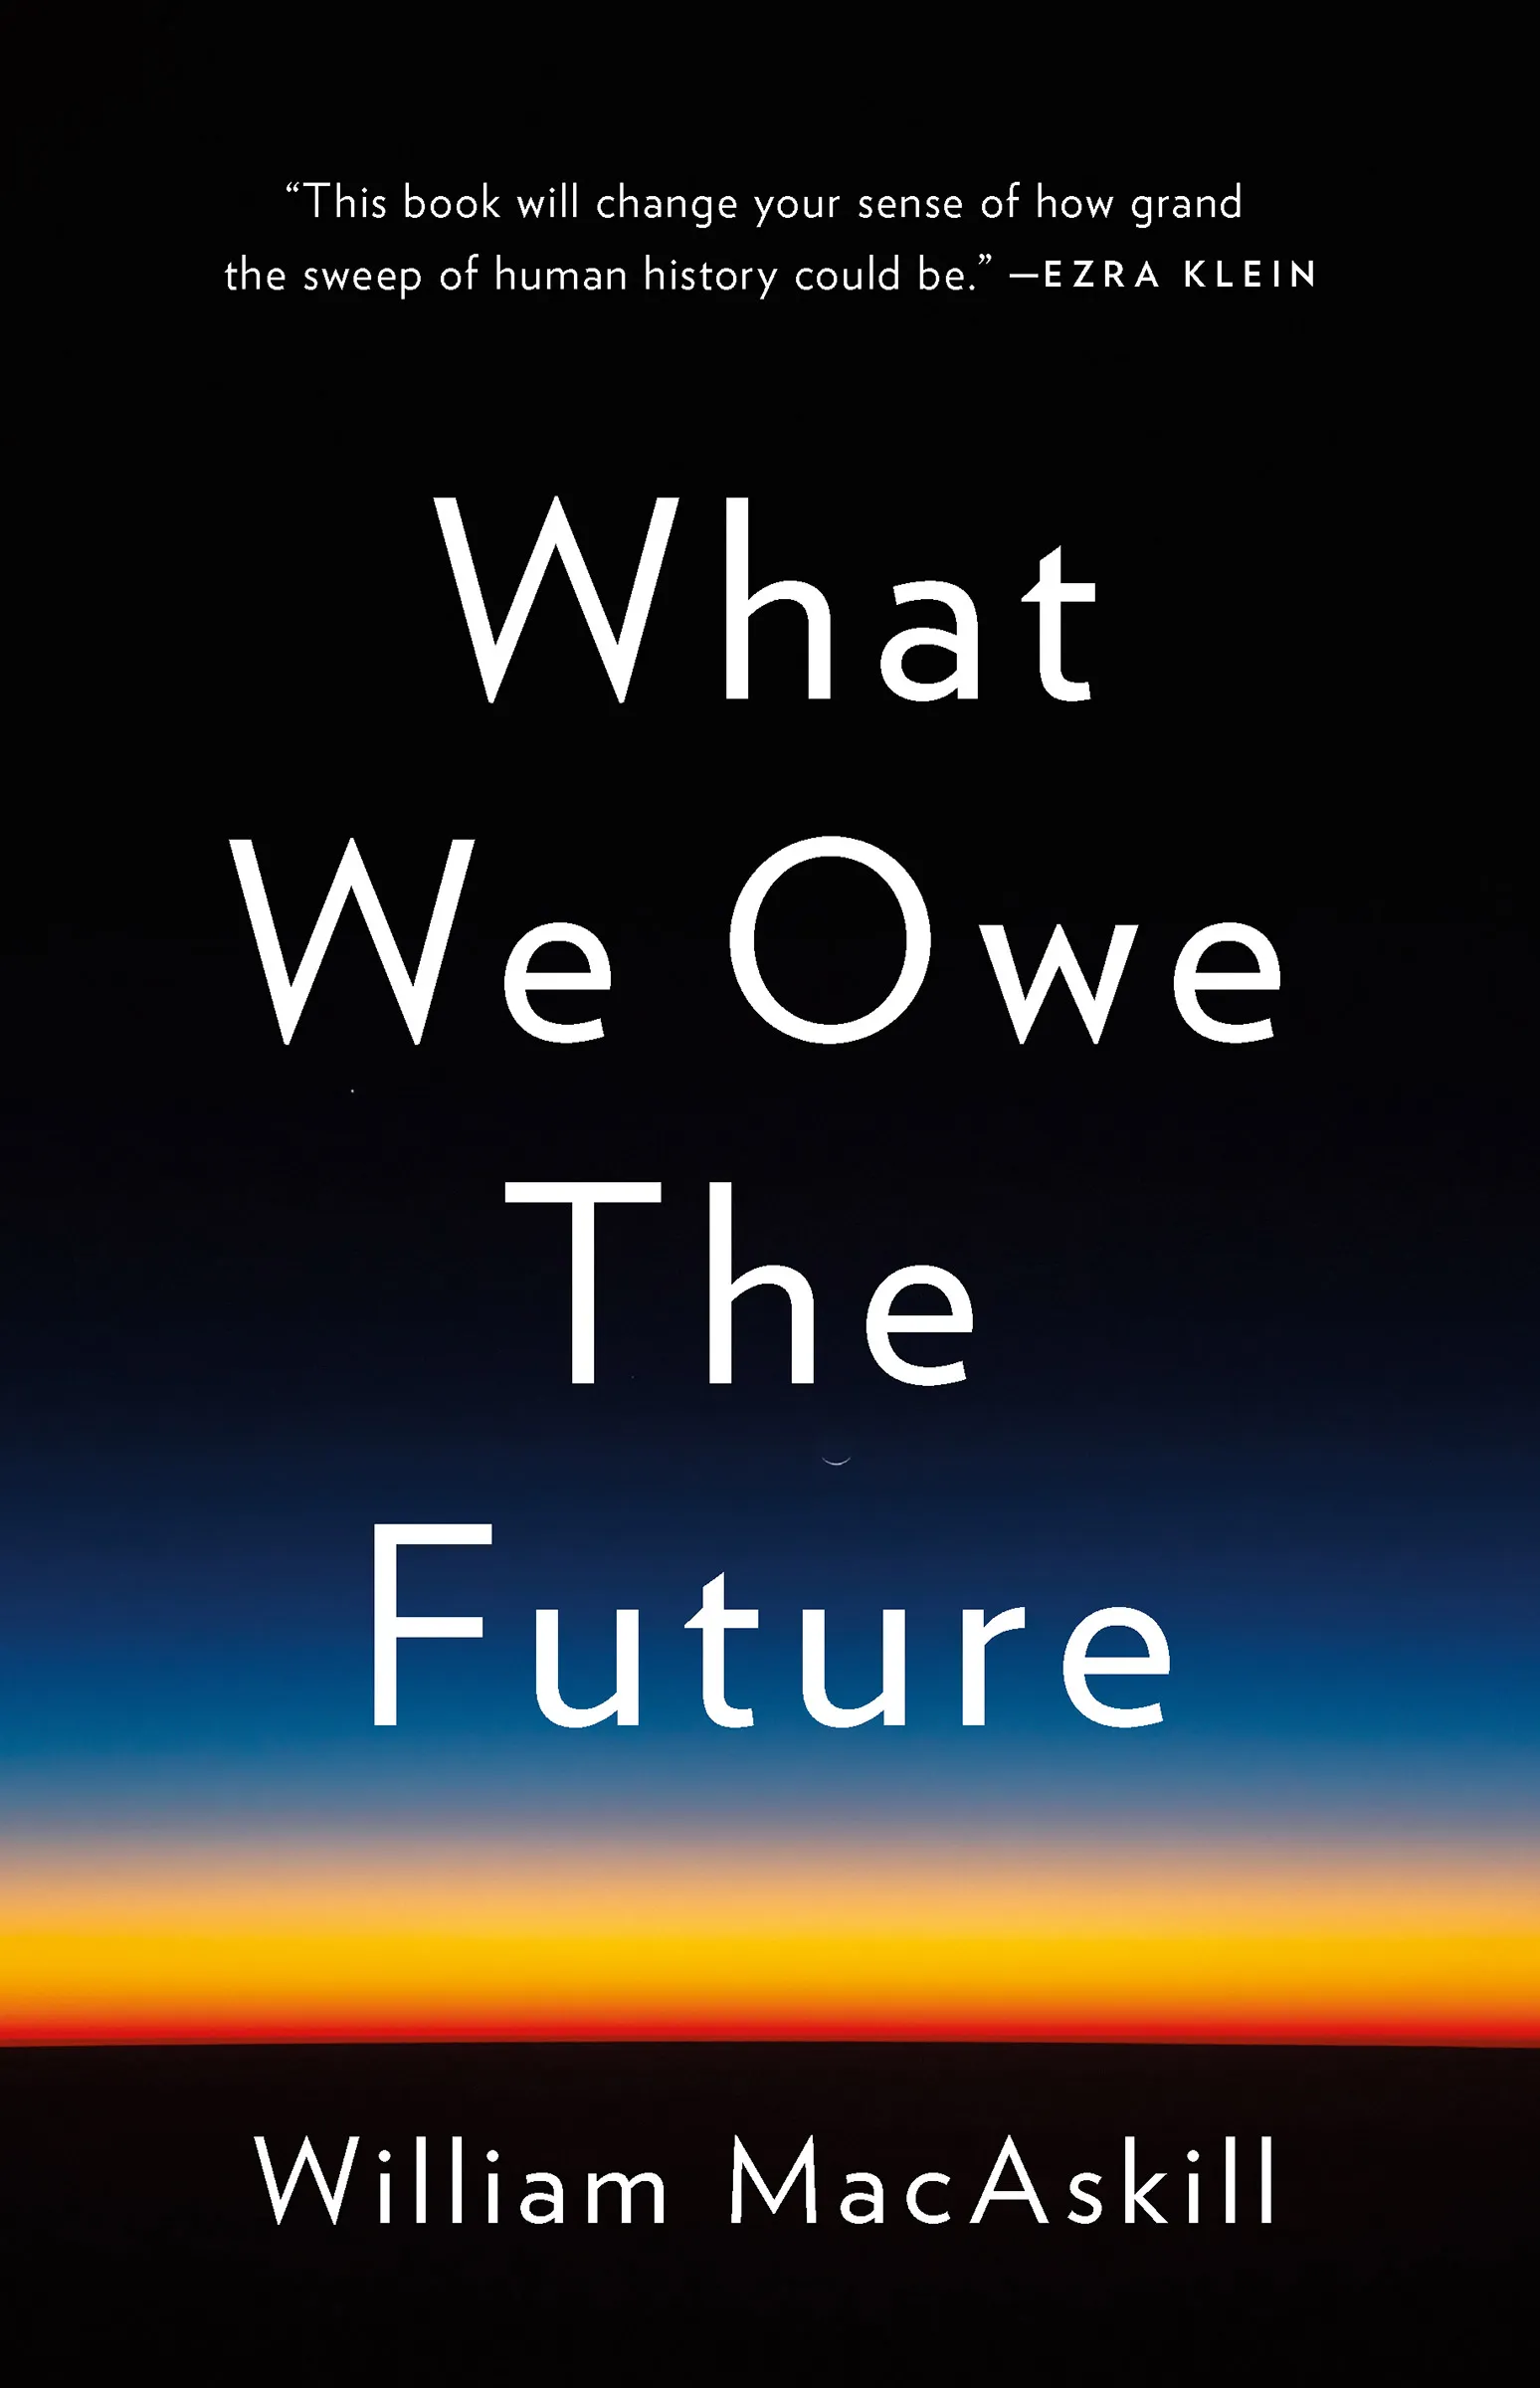 MacAskill-What-We-Owe-The-Future-Cover-Ideas.webp